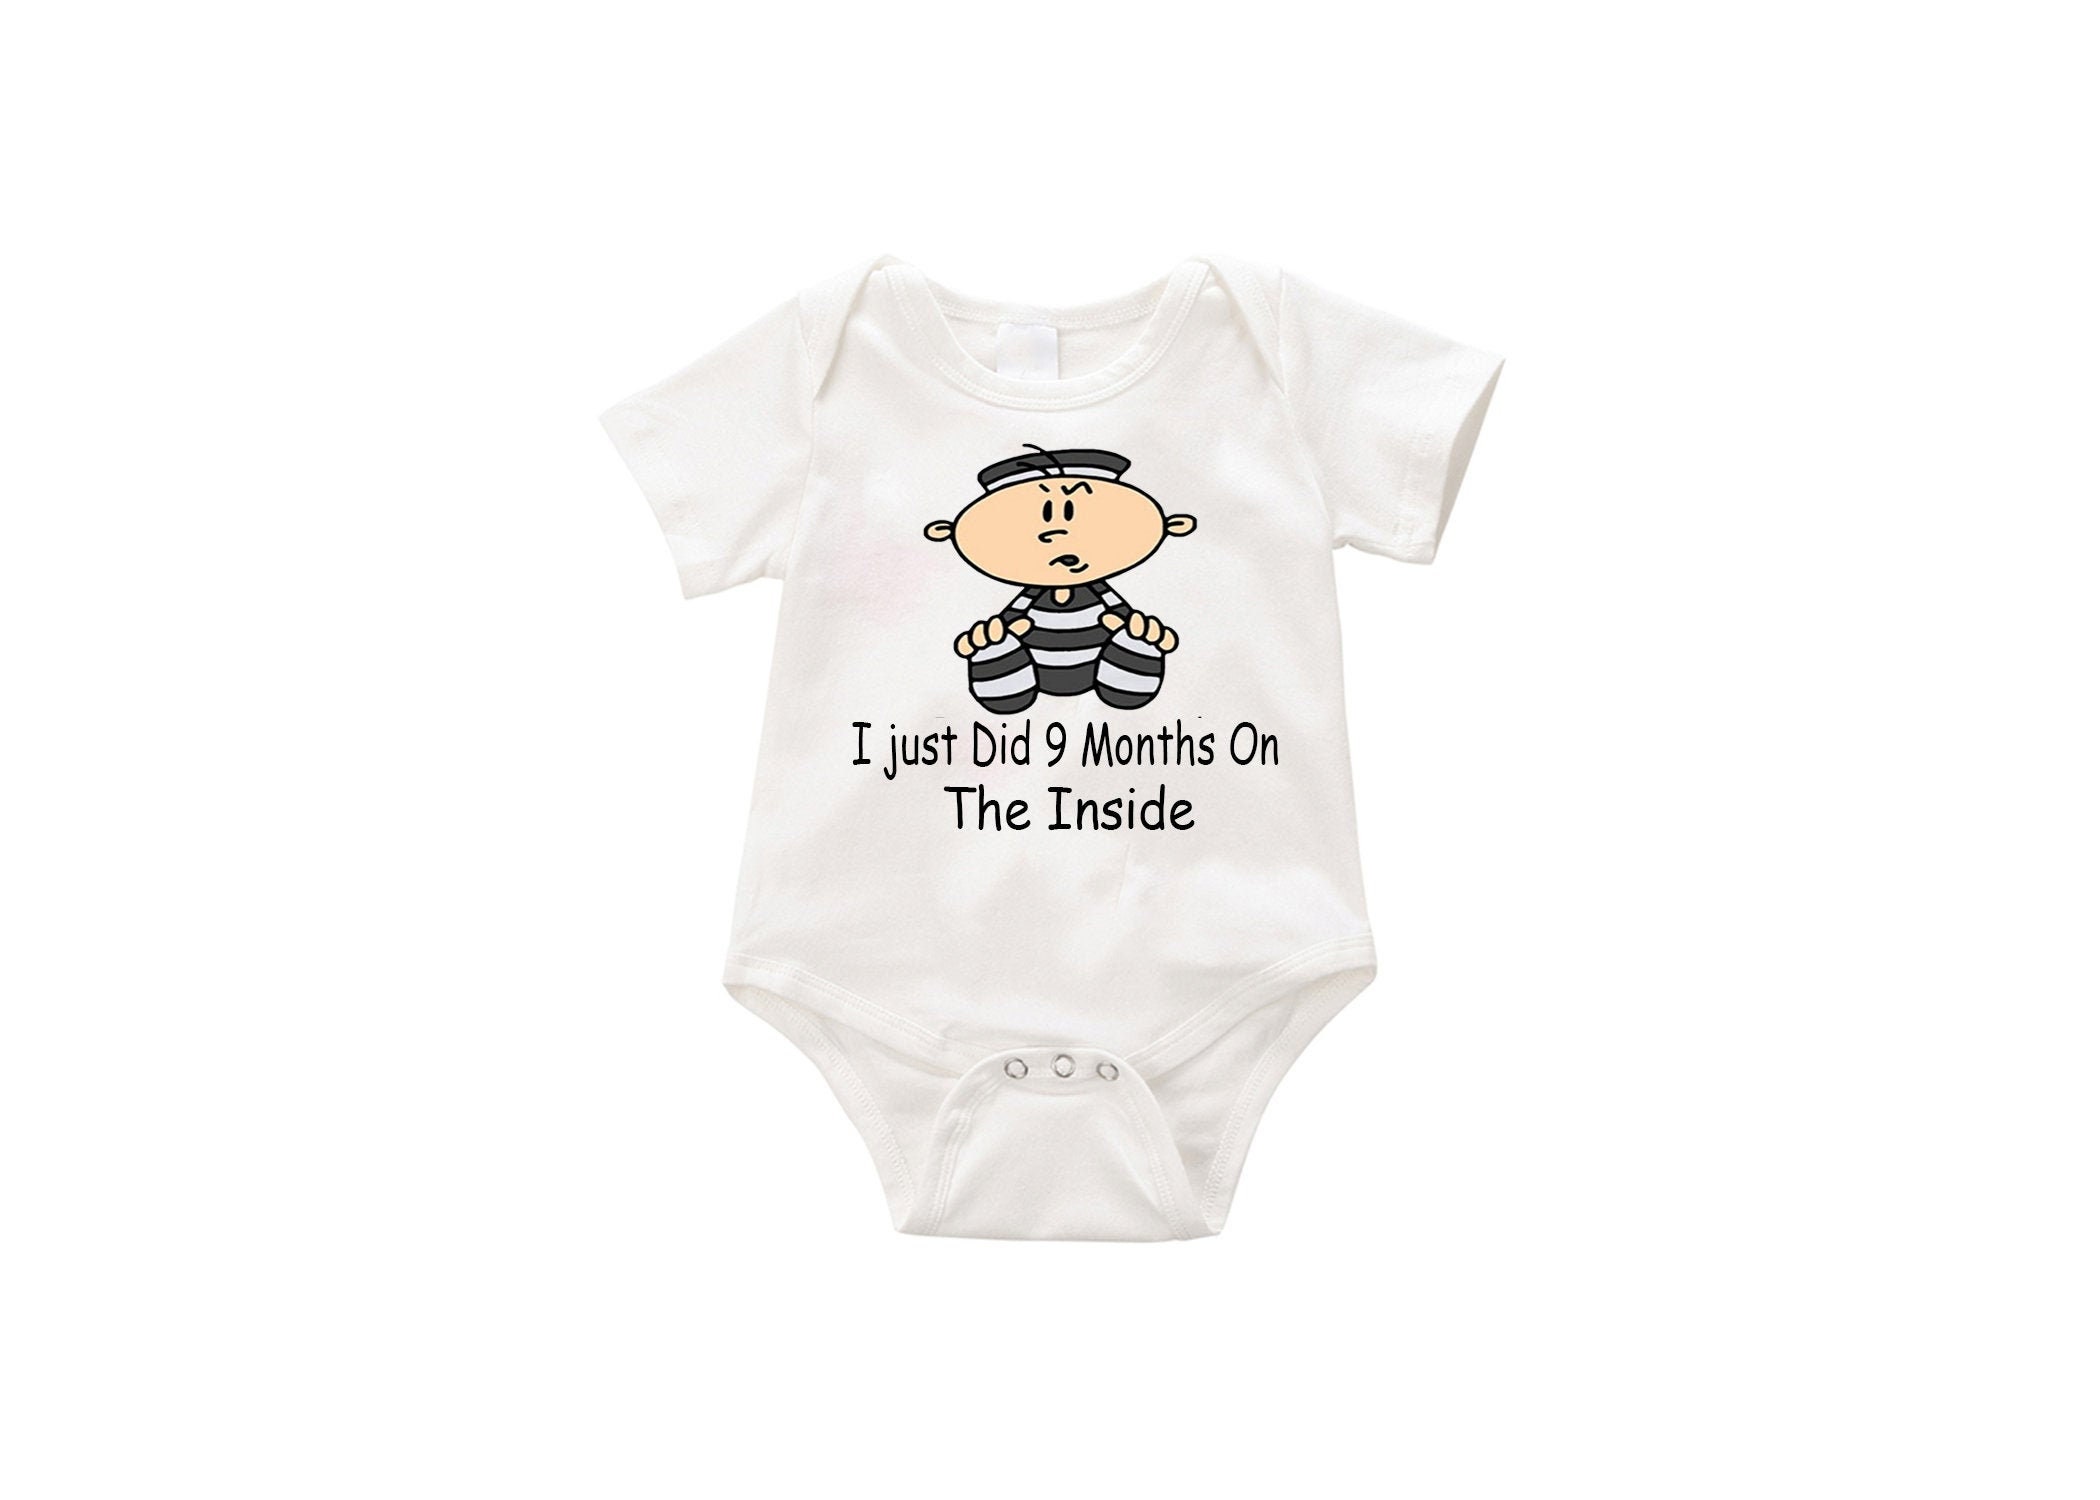 Funny Cute Baby Boy Girl Clothes Handmade Bodysuits by Aiden's Corner 9 Months On The Inside